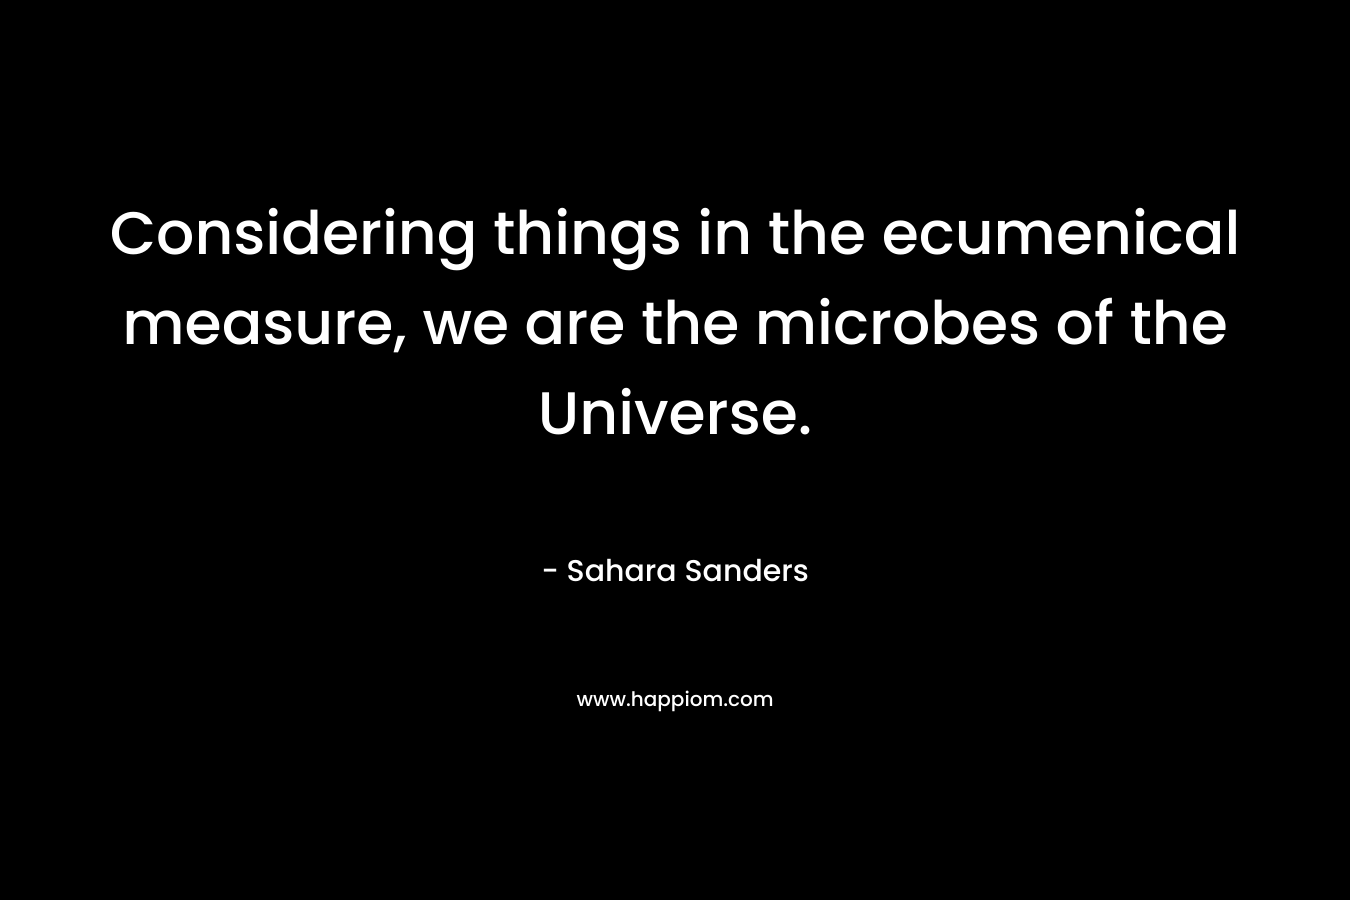 Considering things in the ecumenical measure, we are the microbes of the Universe. – Sahara Sanders